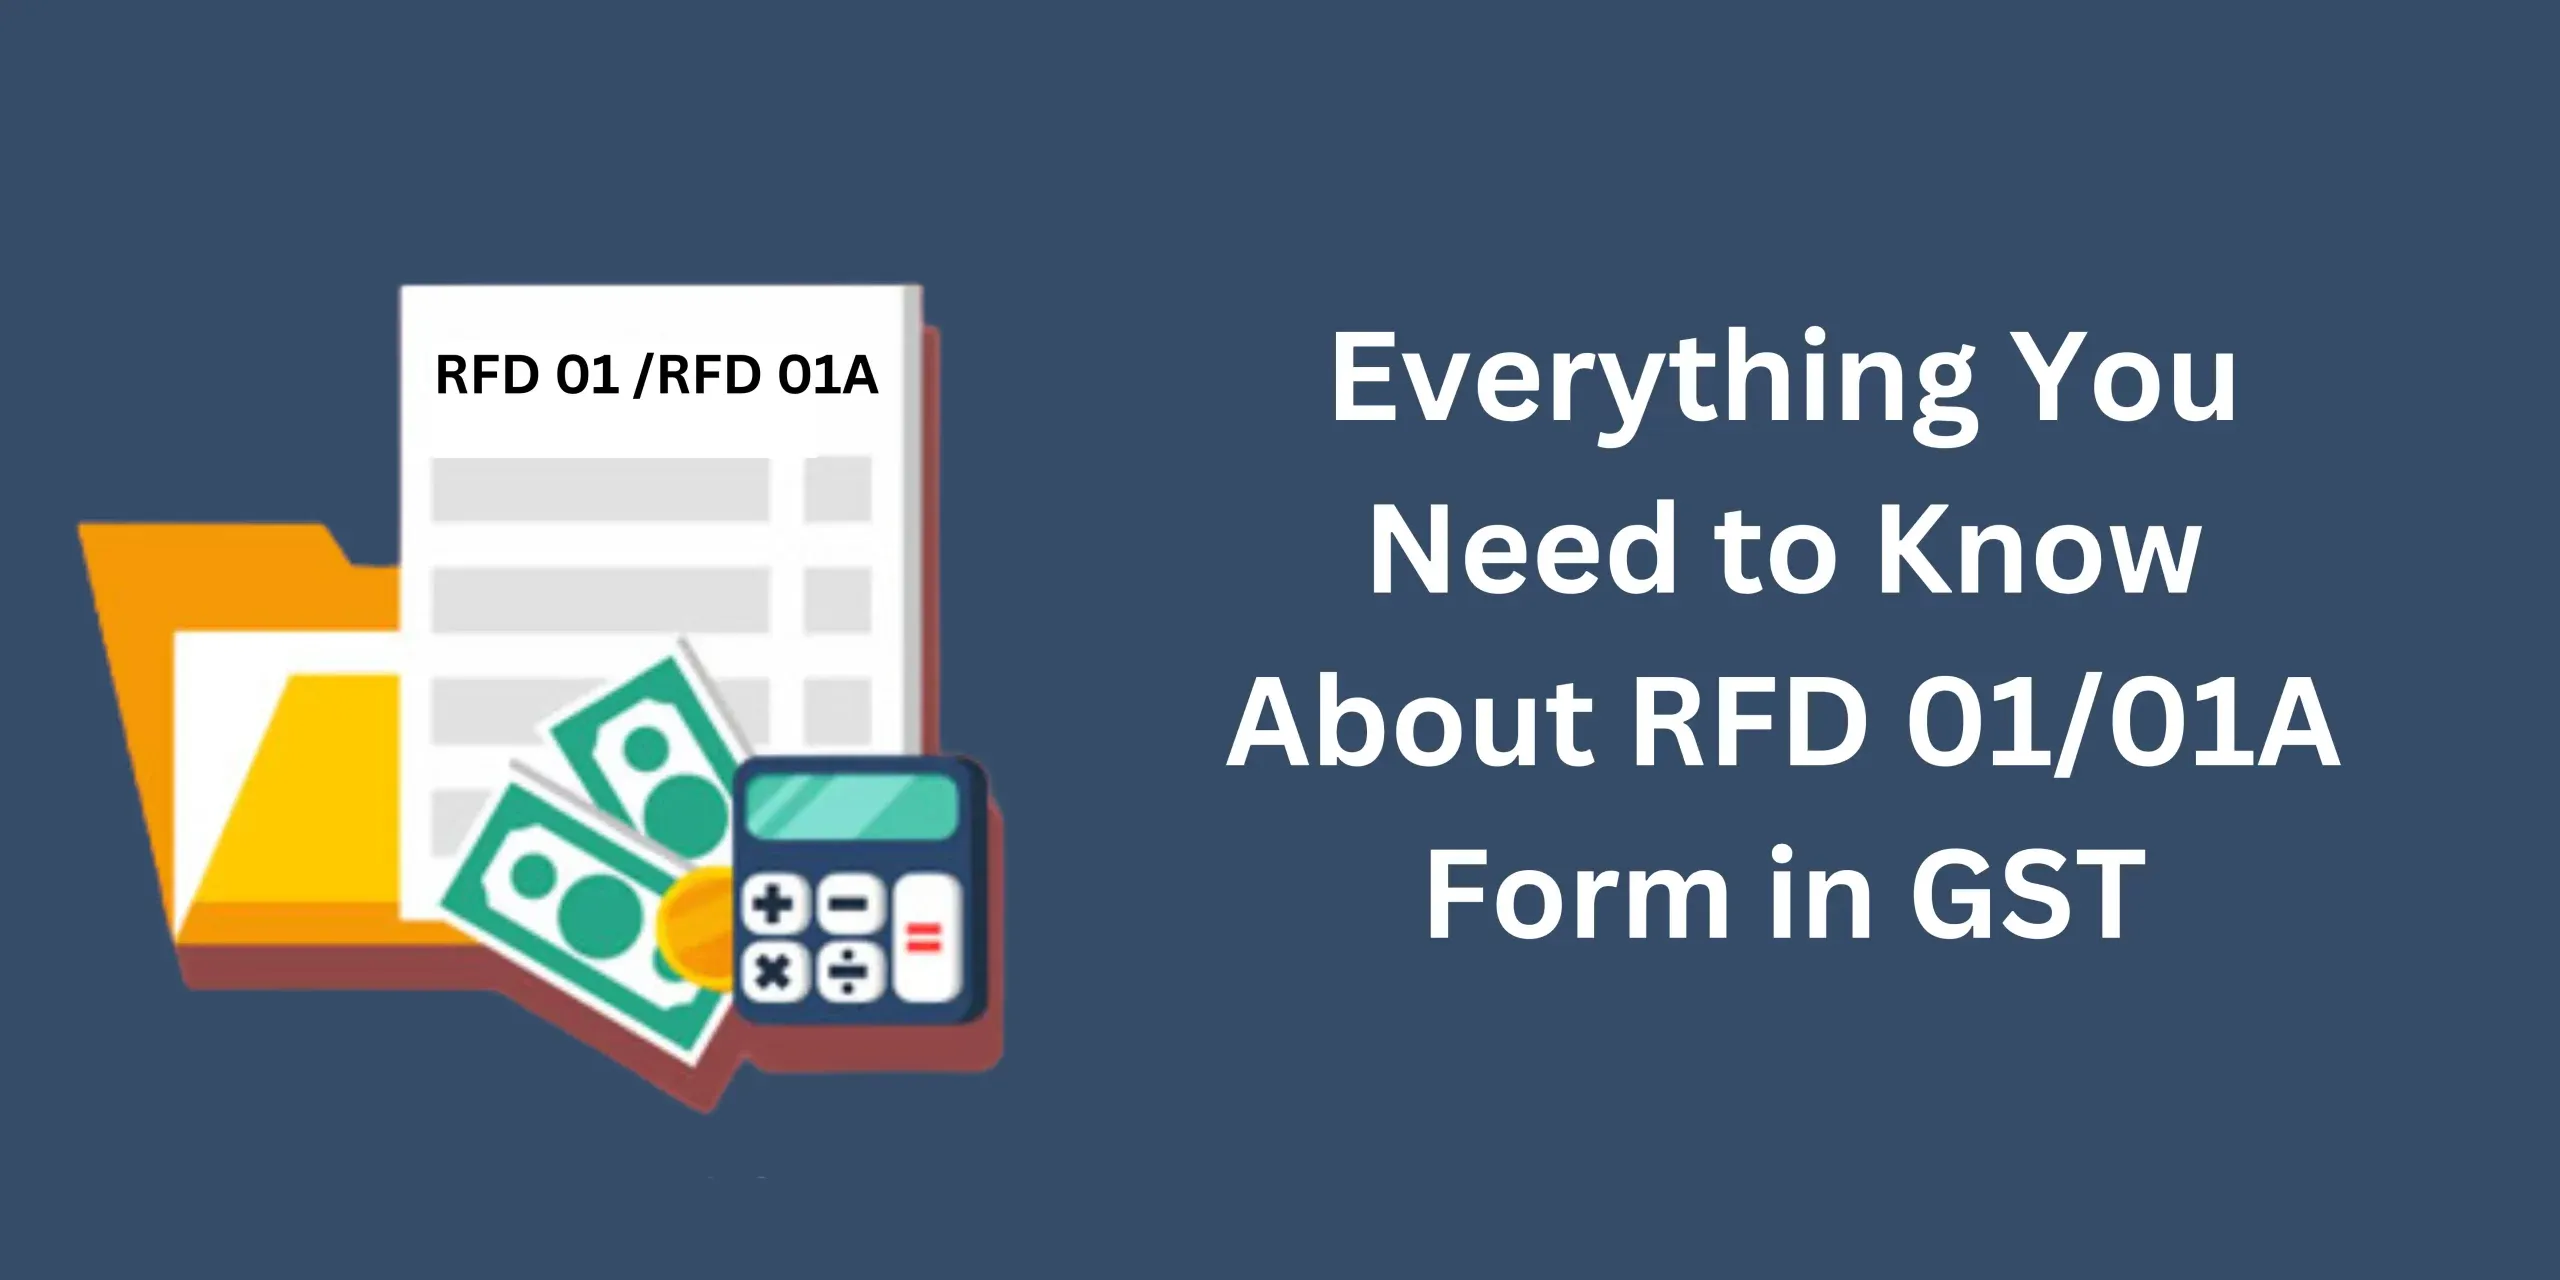 Everything You Need to Know About RFD 01/01A Form in GST